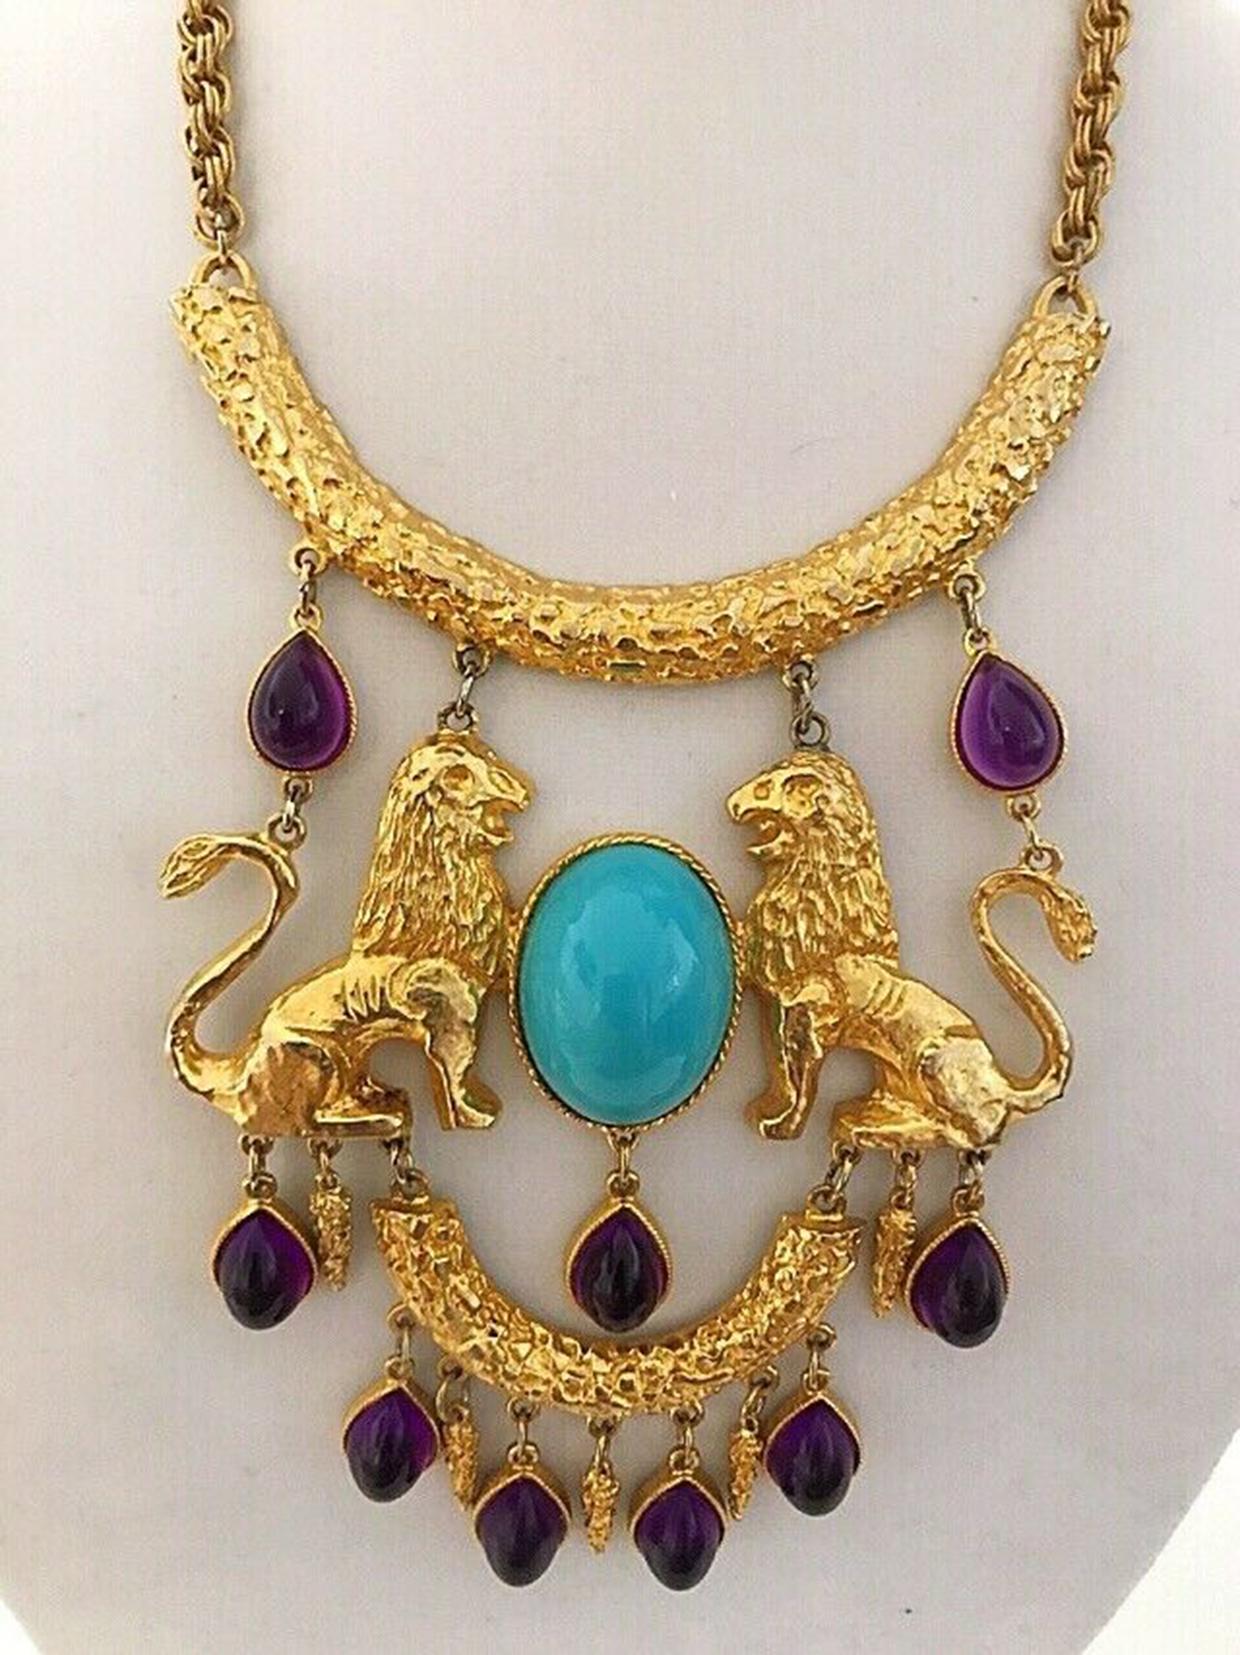 Spectacular Donald Stannard Iconic Twin Lions bib Necklace. Fabulous massive Book Piece Necklace adorned with a large oval shaped cabochon Turquoise Lucite and nine dangling tear drop shaped cabochon Amethyst Lucite; set in ornate gold plated